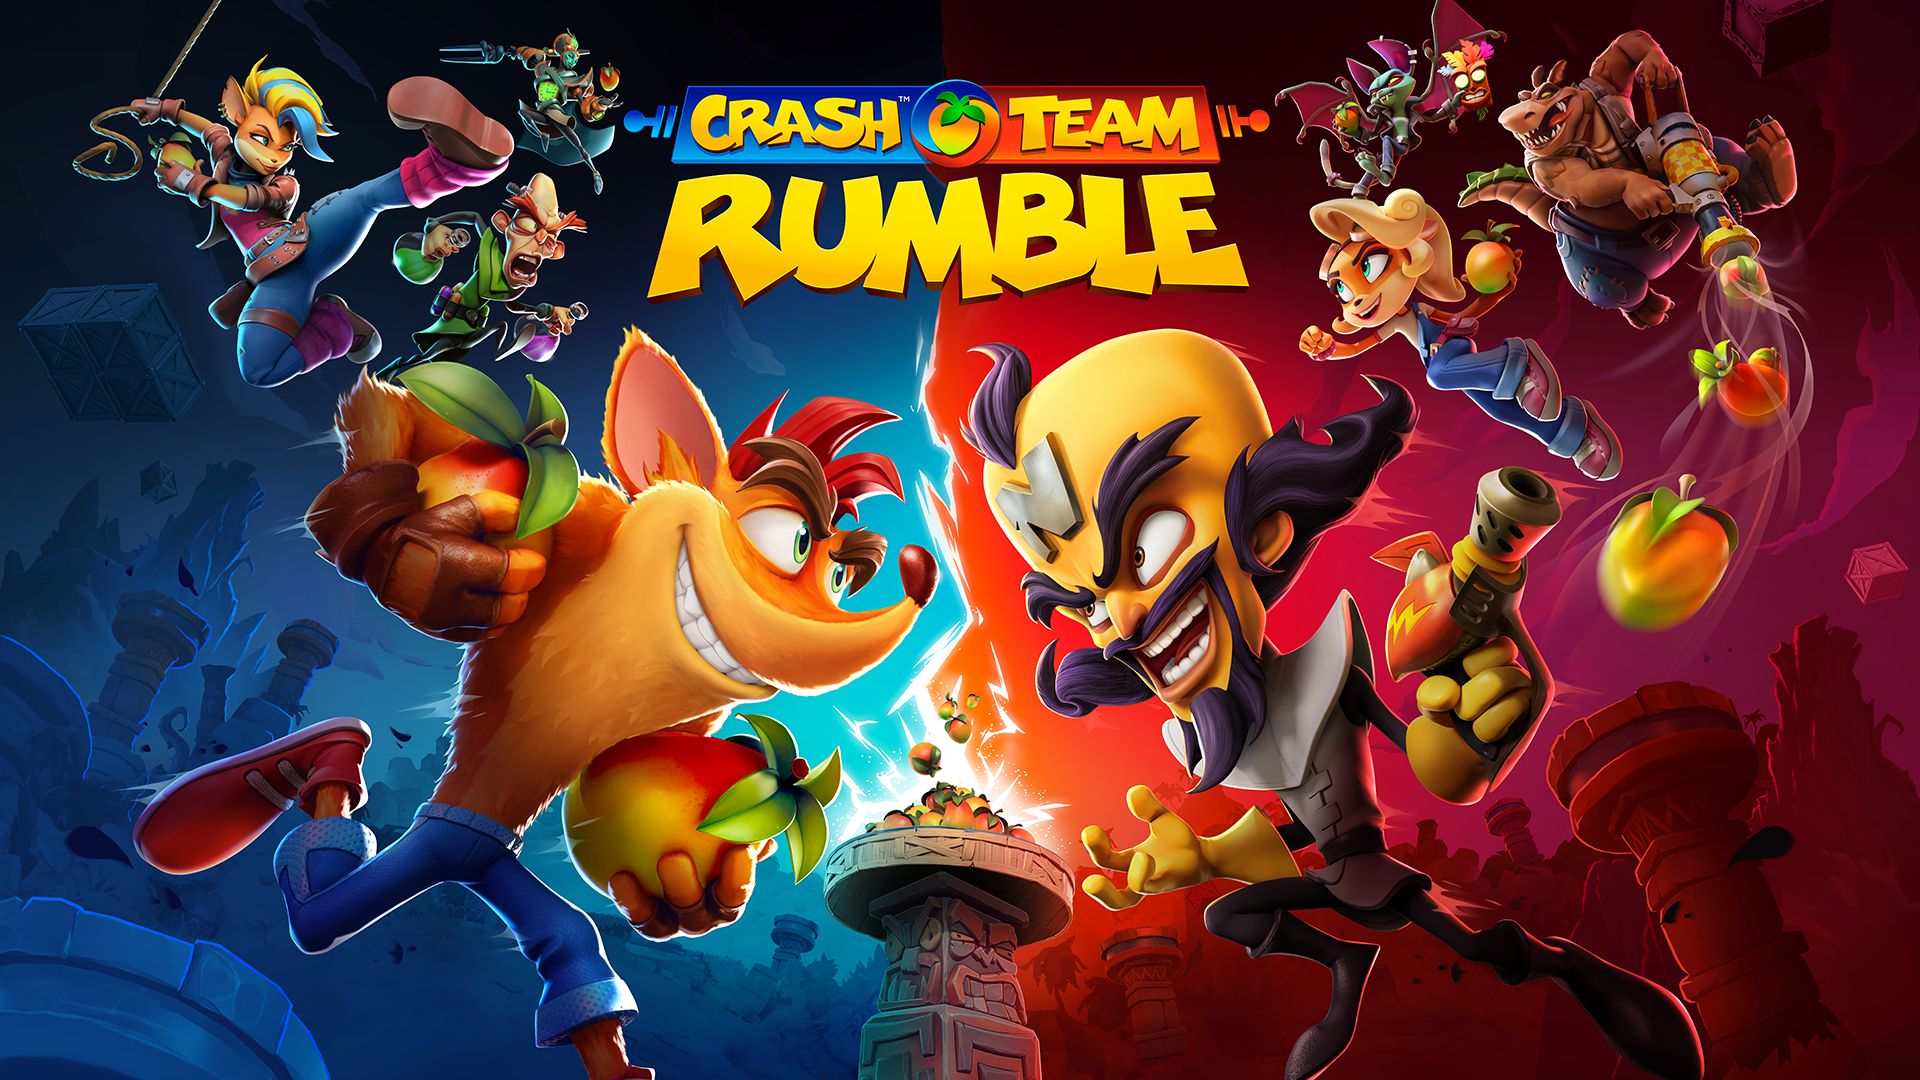 Crash Team Rumble is a New 4v4 Multiplayer Game Coming in 2023 - IGN